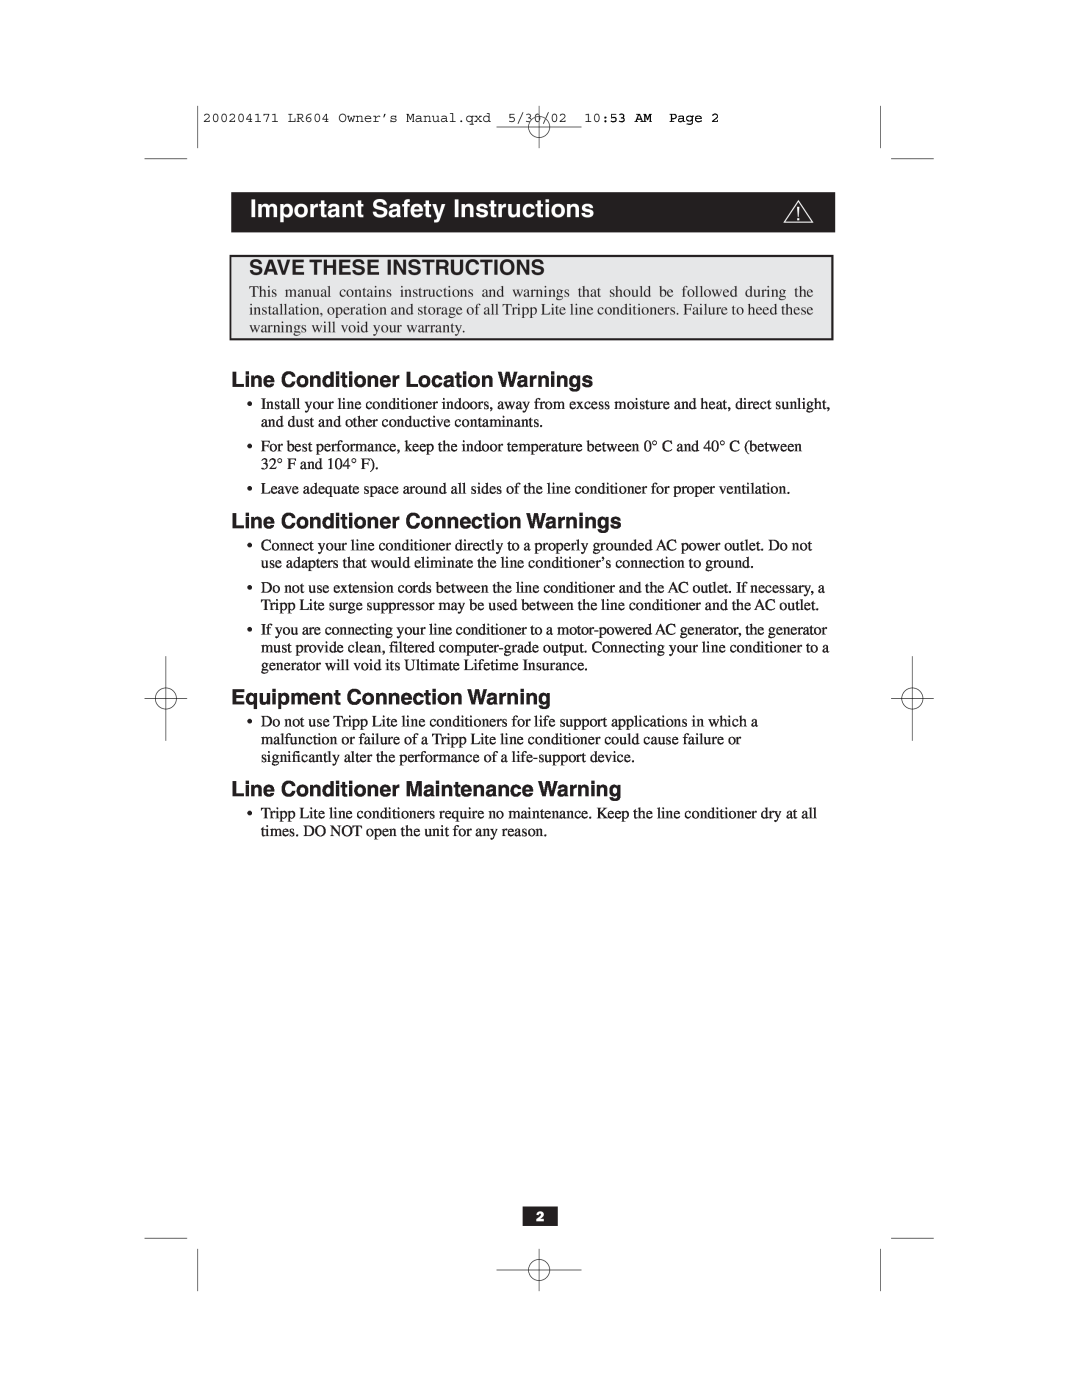 Tripp Lite 230V owner manual Important Safety Instructions, Save These Instructions, Line Conditioner Location Warnings 